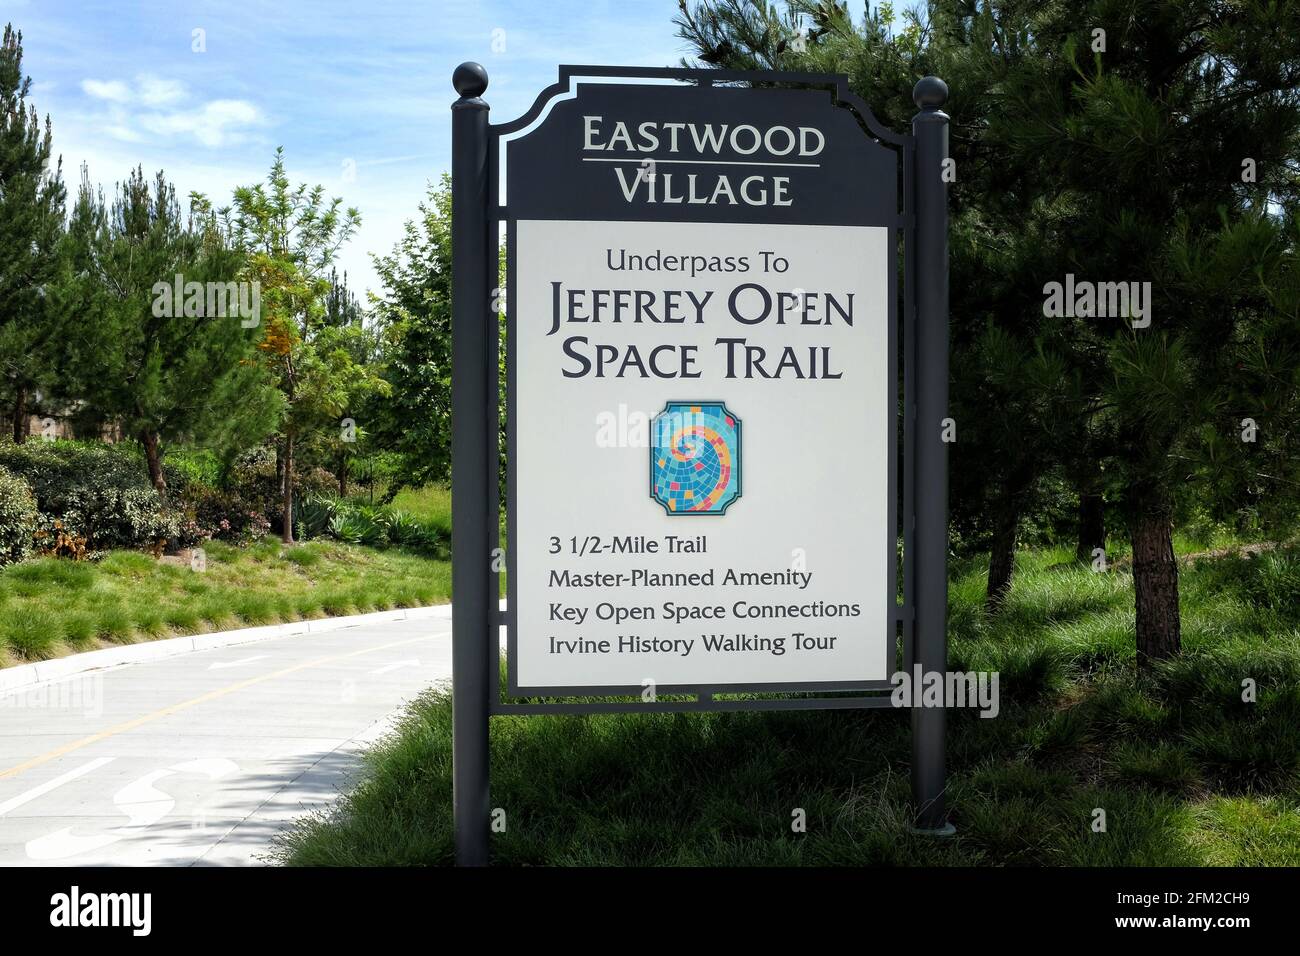 IRVINE, CALIFORNIA - 1 MAY 2021: Eastwood Village entrance sign to the Jeffrey Open Space Trail. Stock Photo